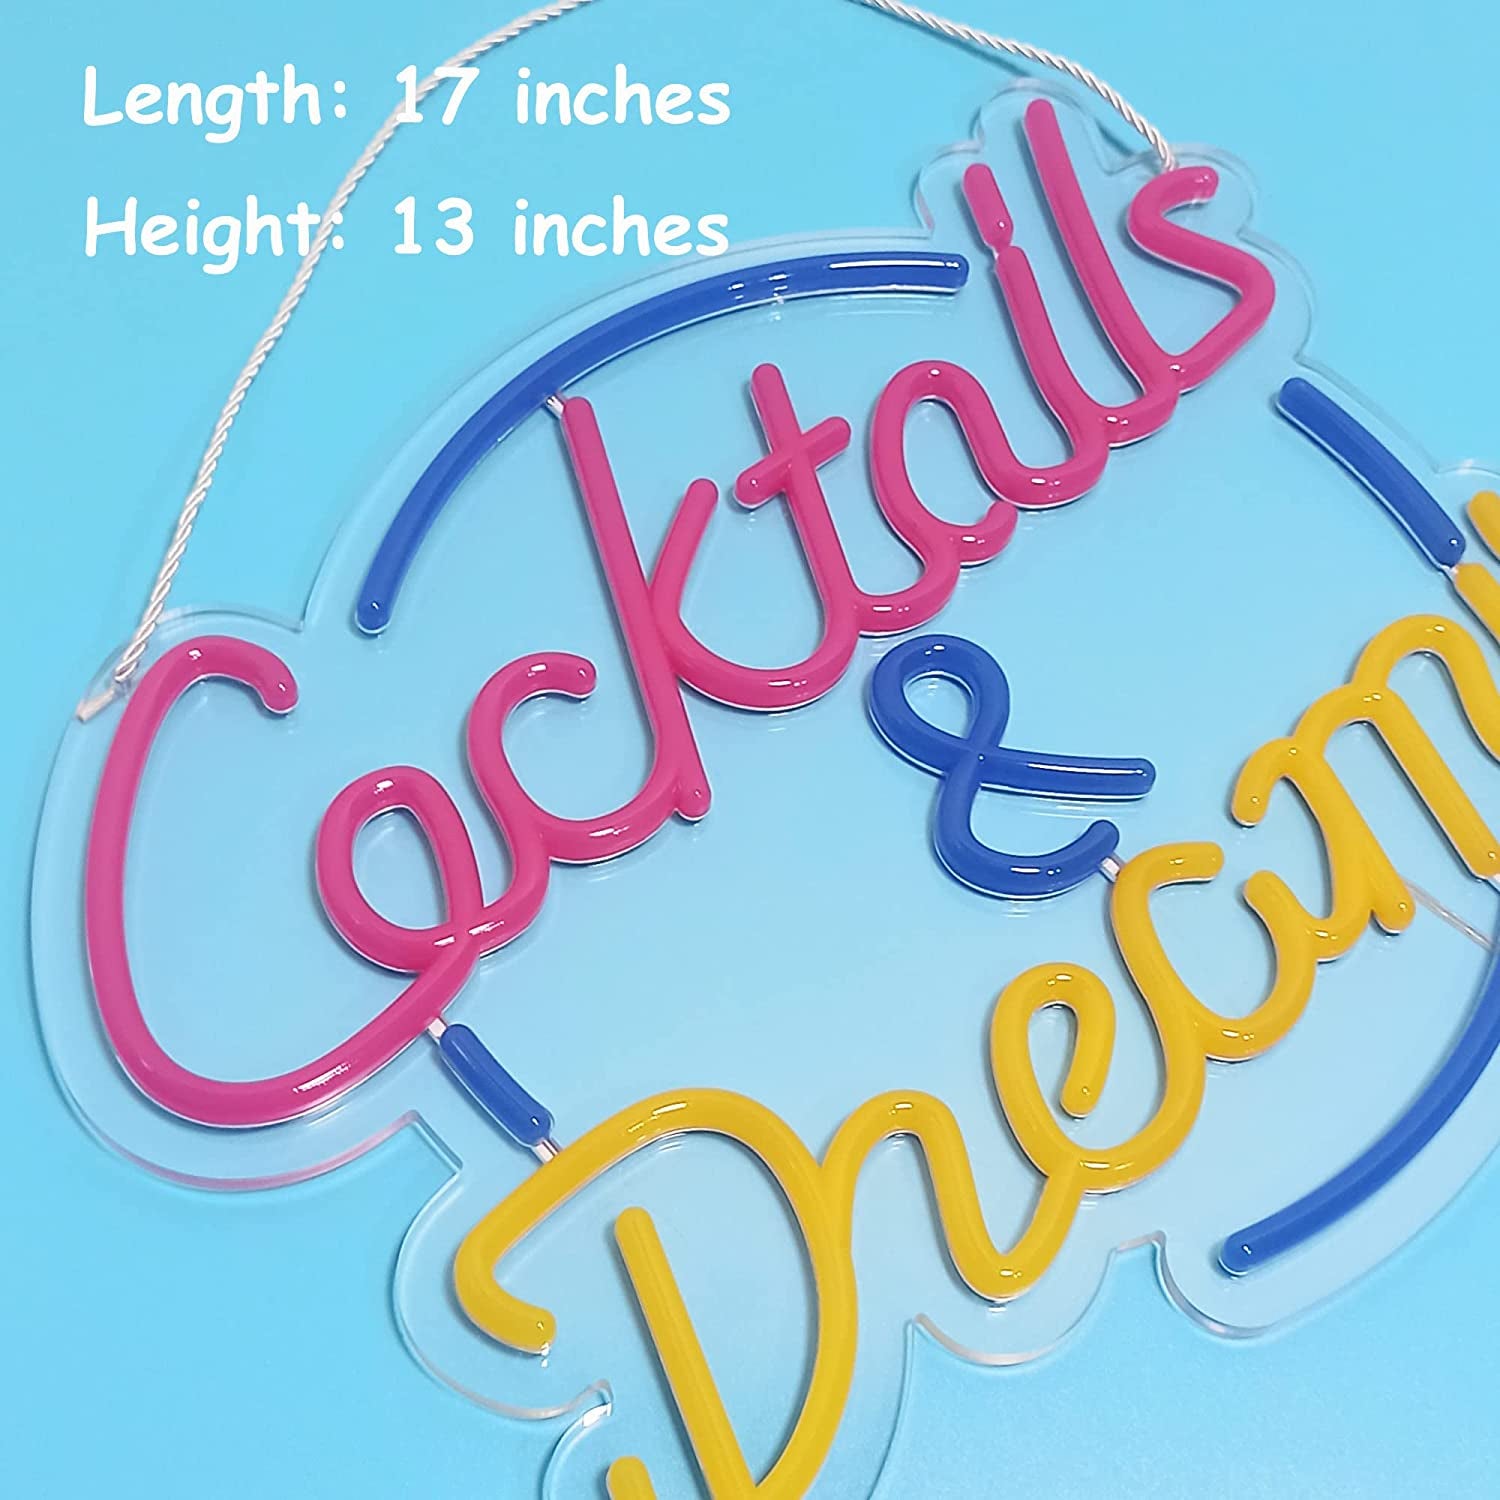 Cocktails Dreams Neon Sign,Innovative Integral Forming Process,With Dimmable Switch for All Holiday Party and Home Decoration,17×13Inch,Colorful